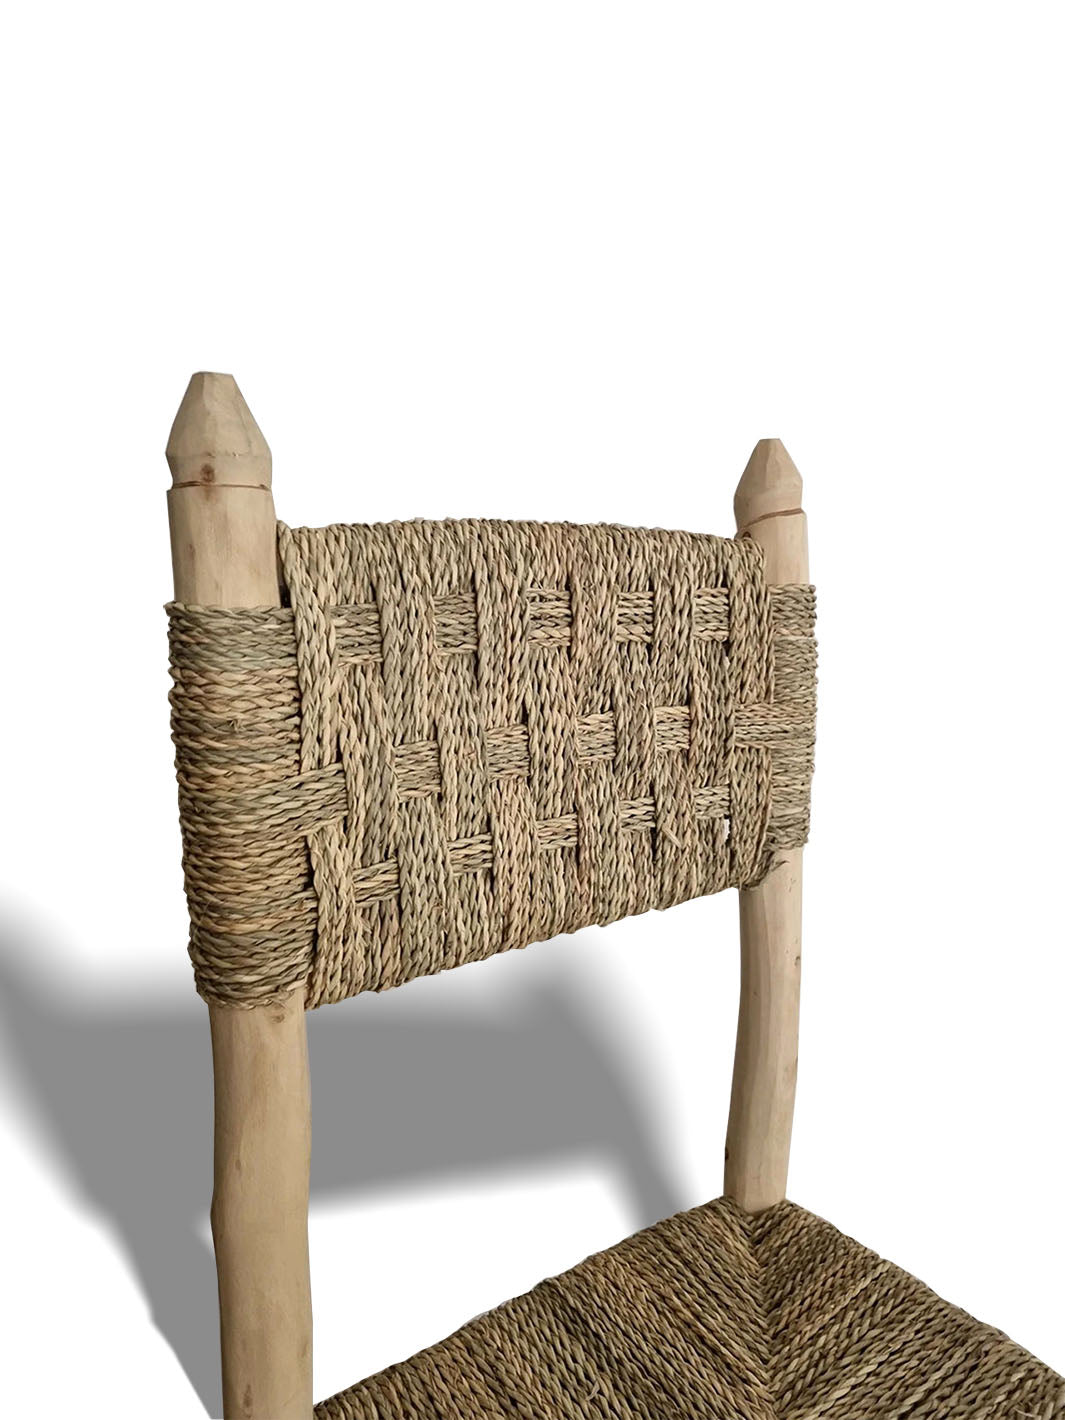 Handcrafted Laurel Wood Artisanal Moroccan Chair Libitii Chairs LIB-0027-1